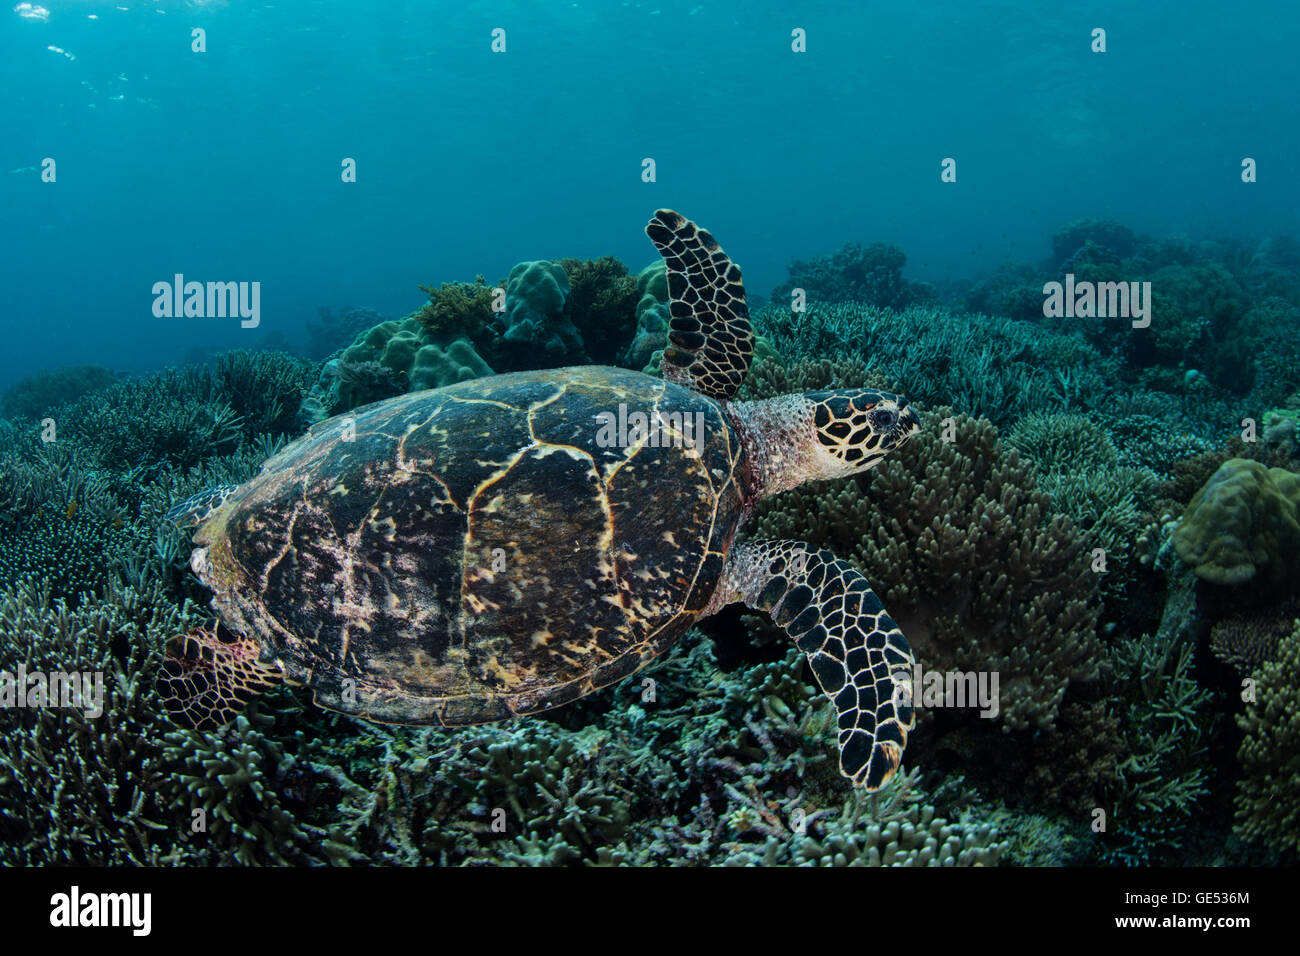 A Hawksbill sea turtle (Eretmochelys imbricata) swims over a coral reef in Raja Ampat, Indonesia. This is an endangered species. Stock Photo